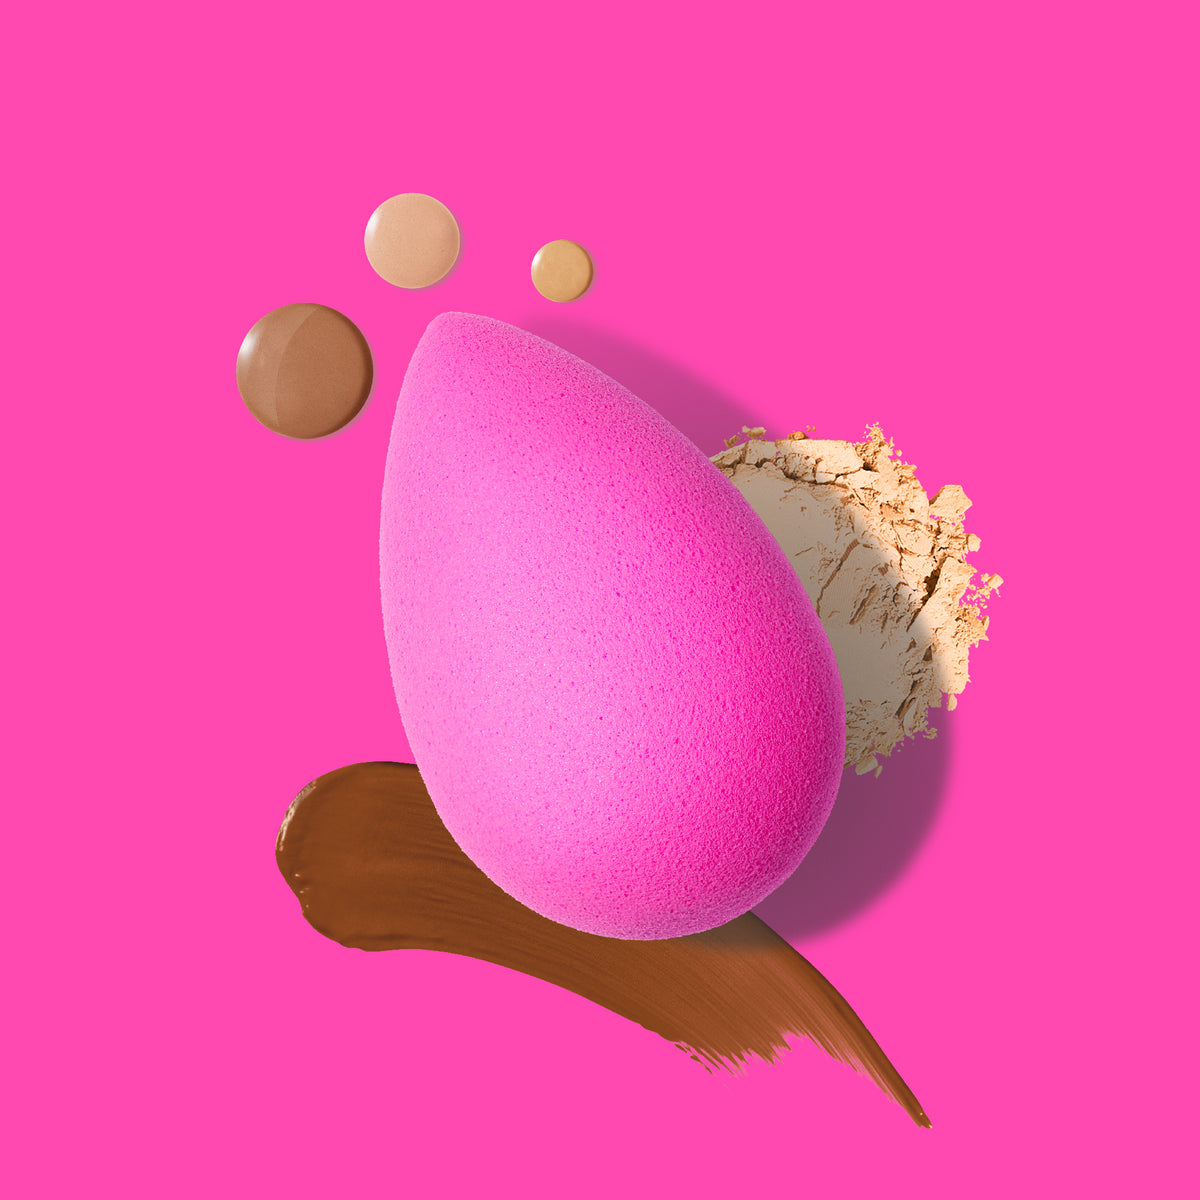 Beautyblender® Original Beauty Queen Limited-Edition with Crystal Nest.